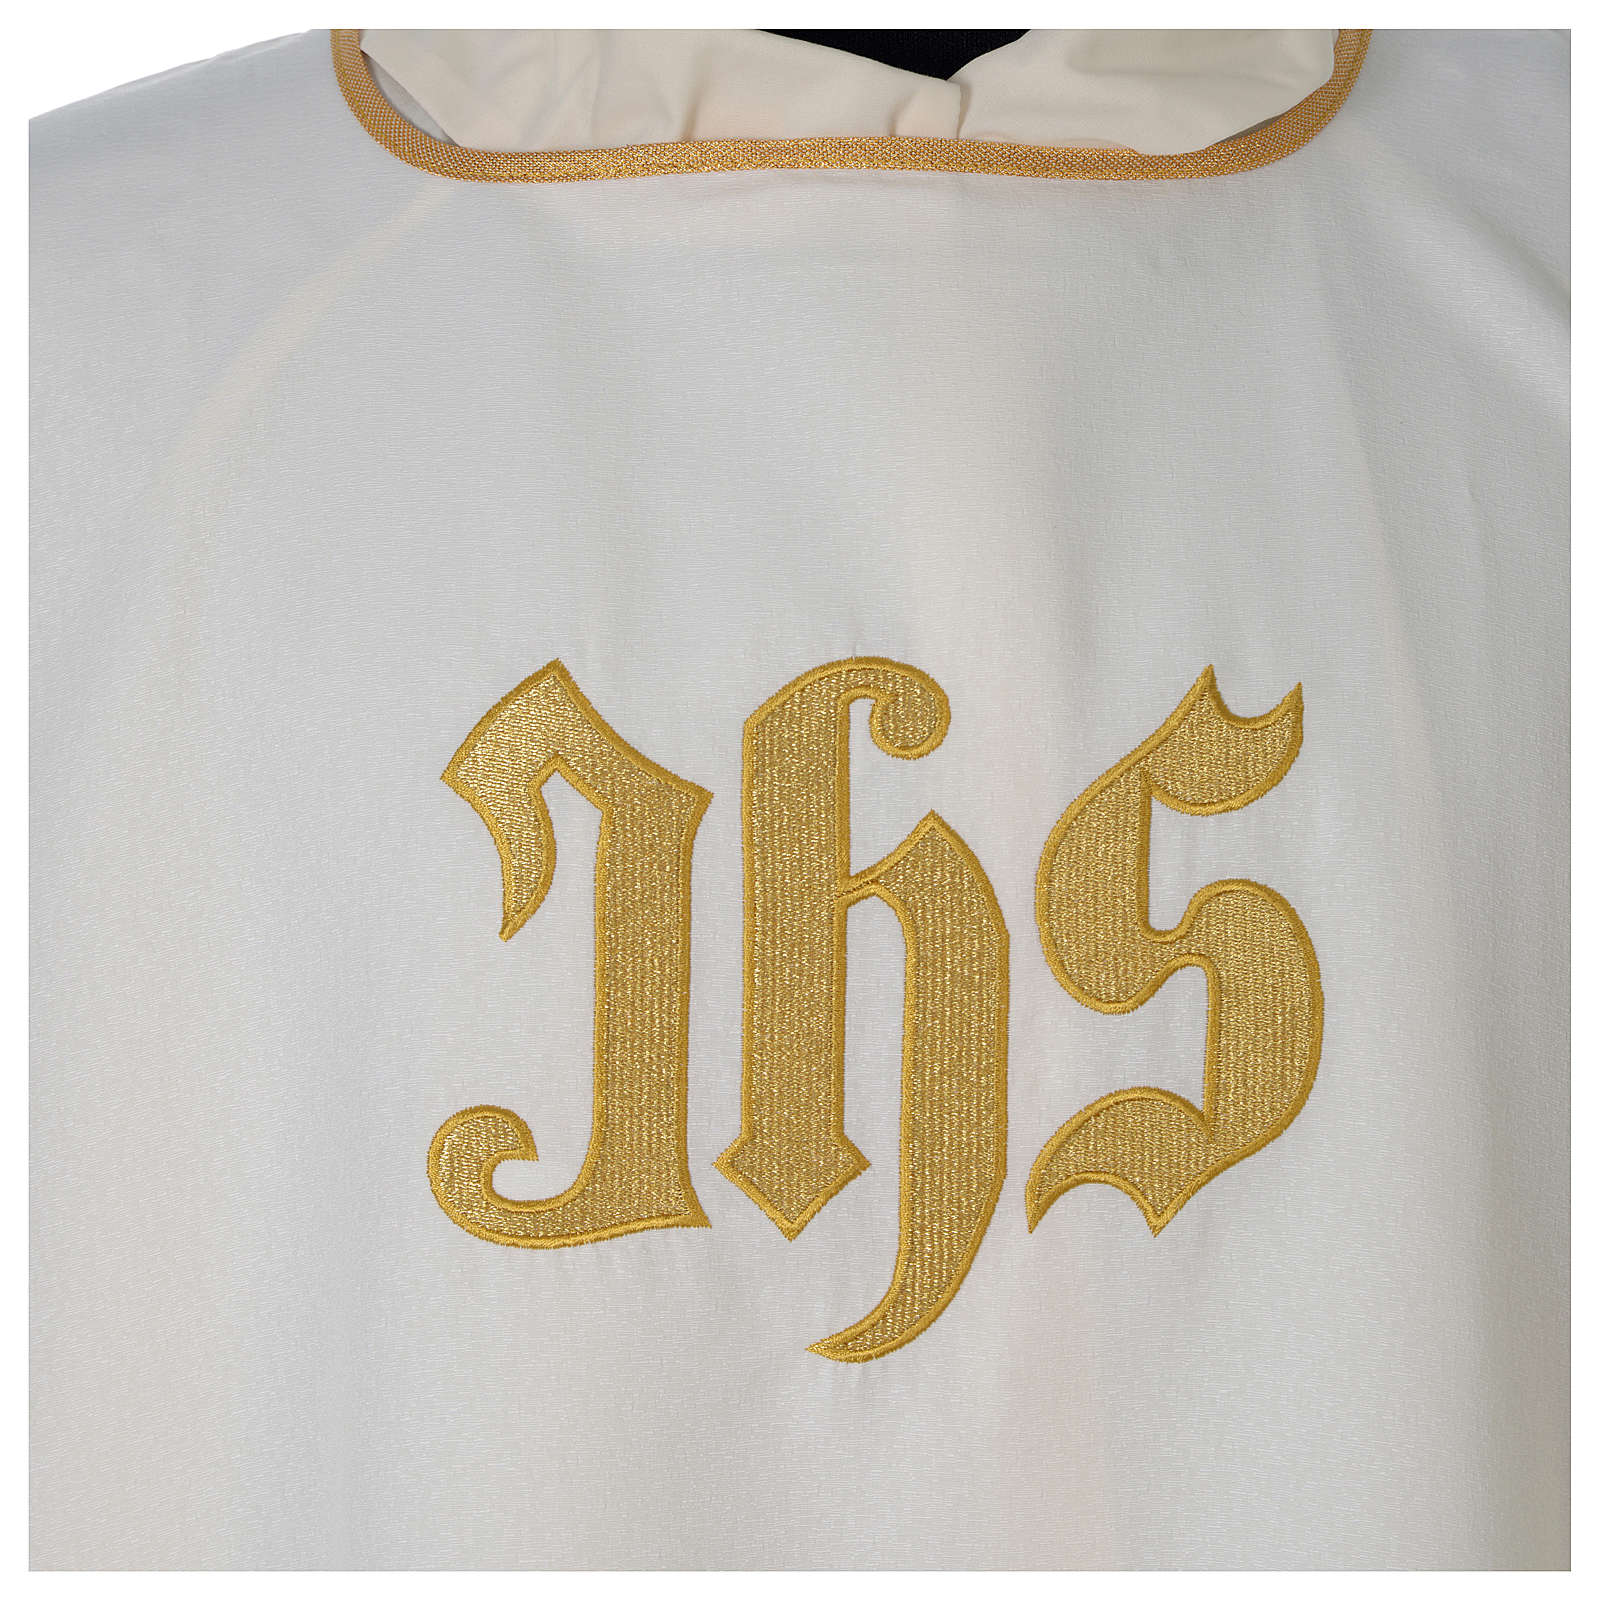 Deacon dalmatic with embroidered IHS symbol | online sales on HOLYART.com